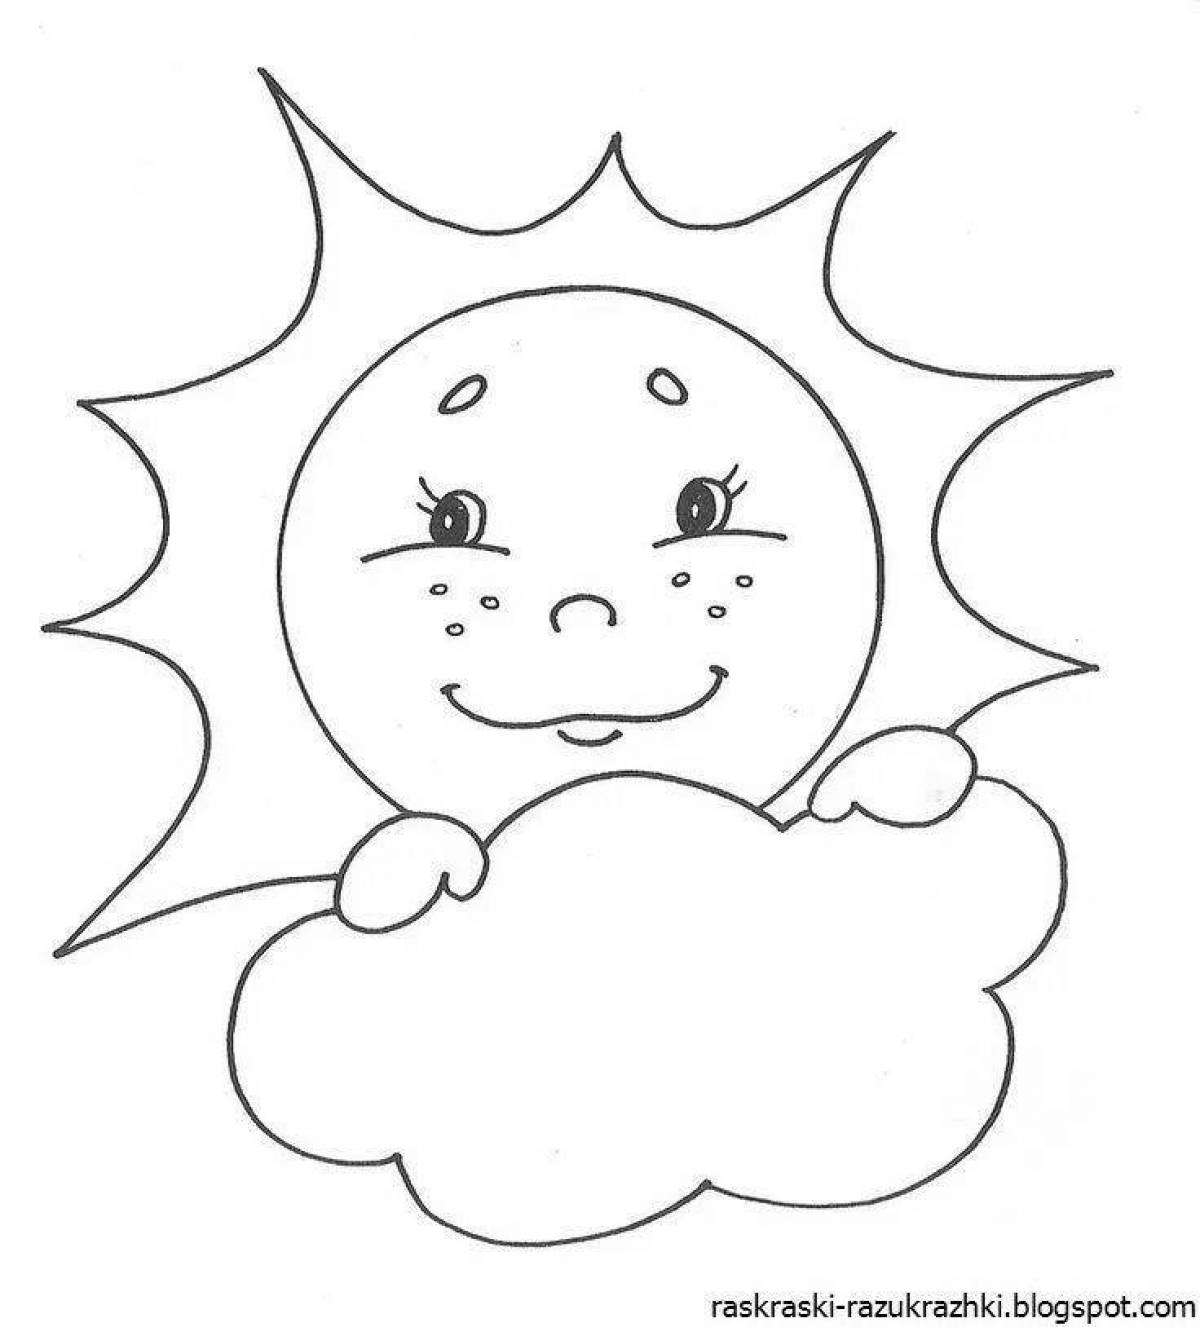 Playful sun coloring book for 2-3 year olds